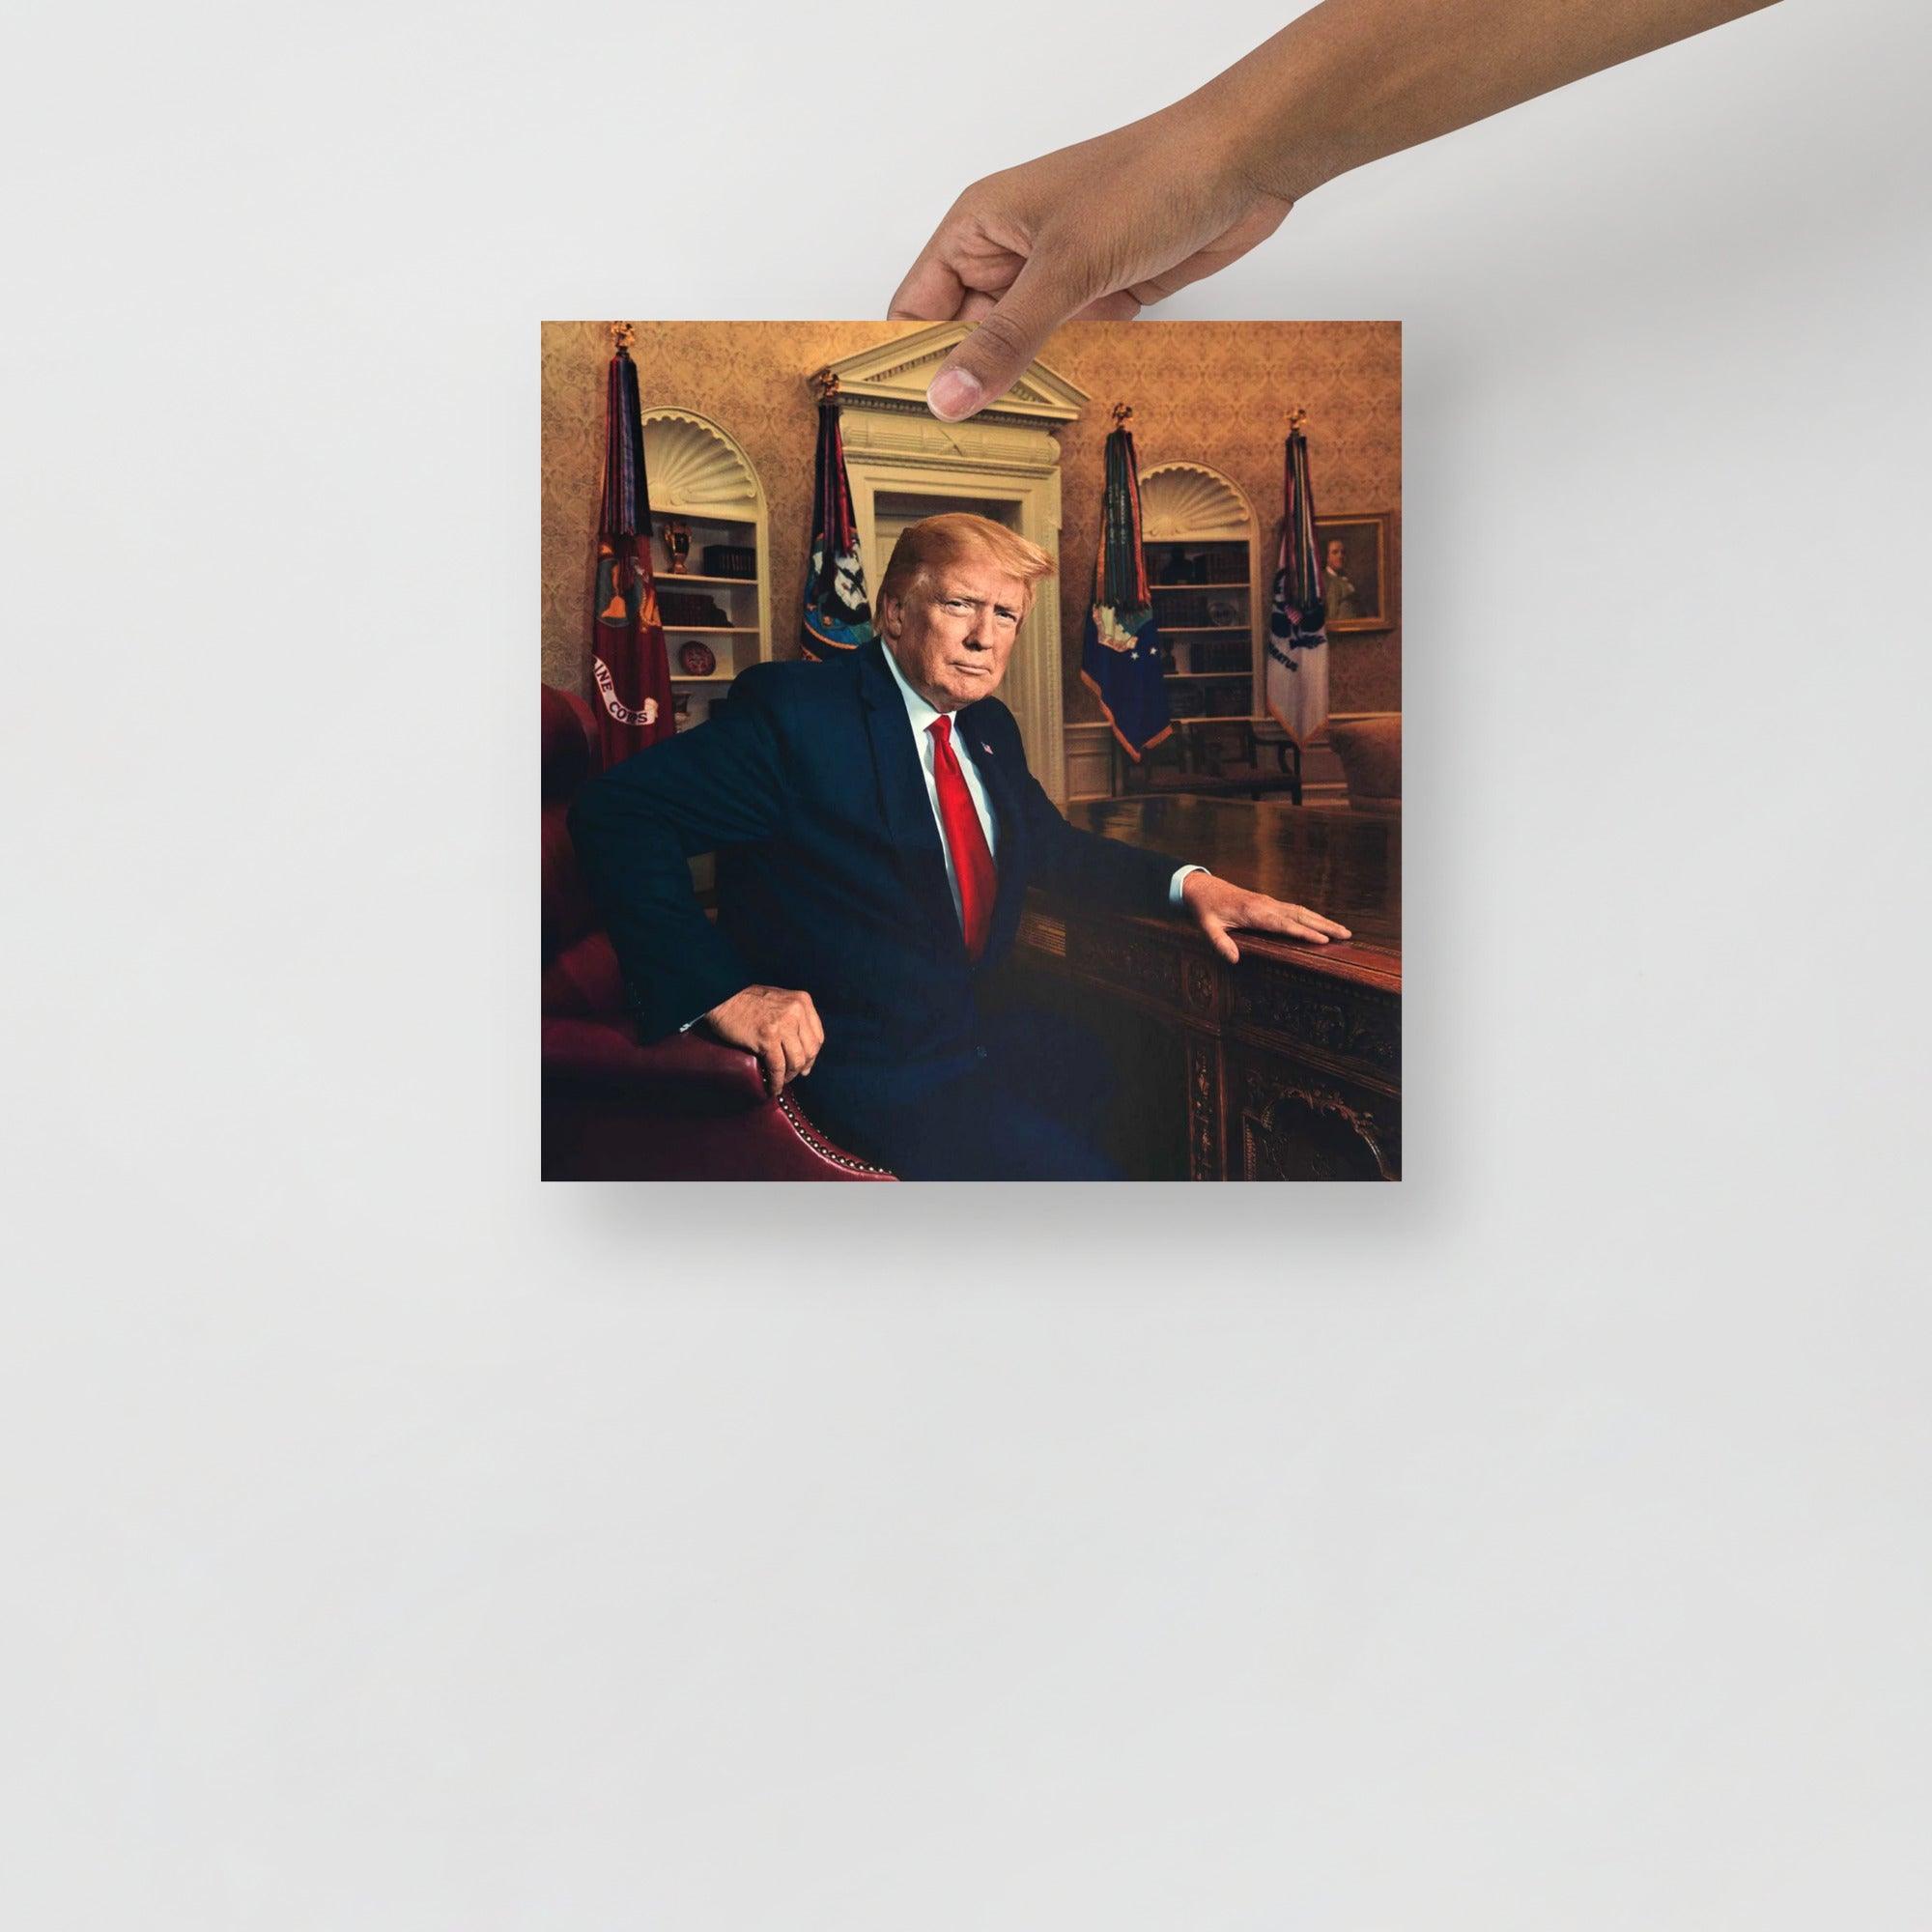 A Donald Trump at the Oval Office poster on a plain backdrop in size 12x12”.